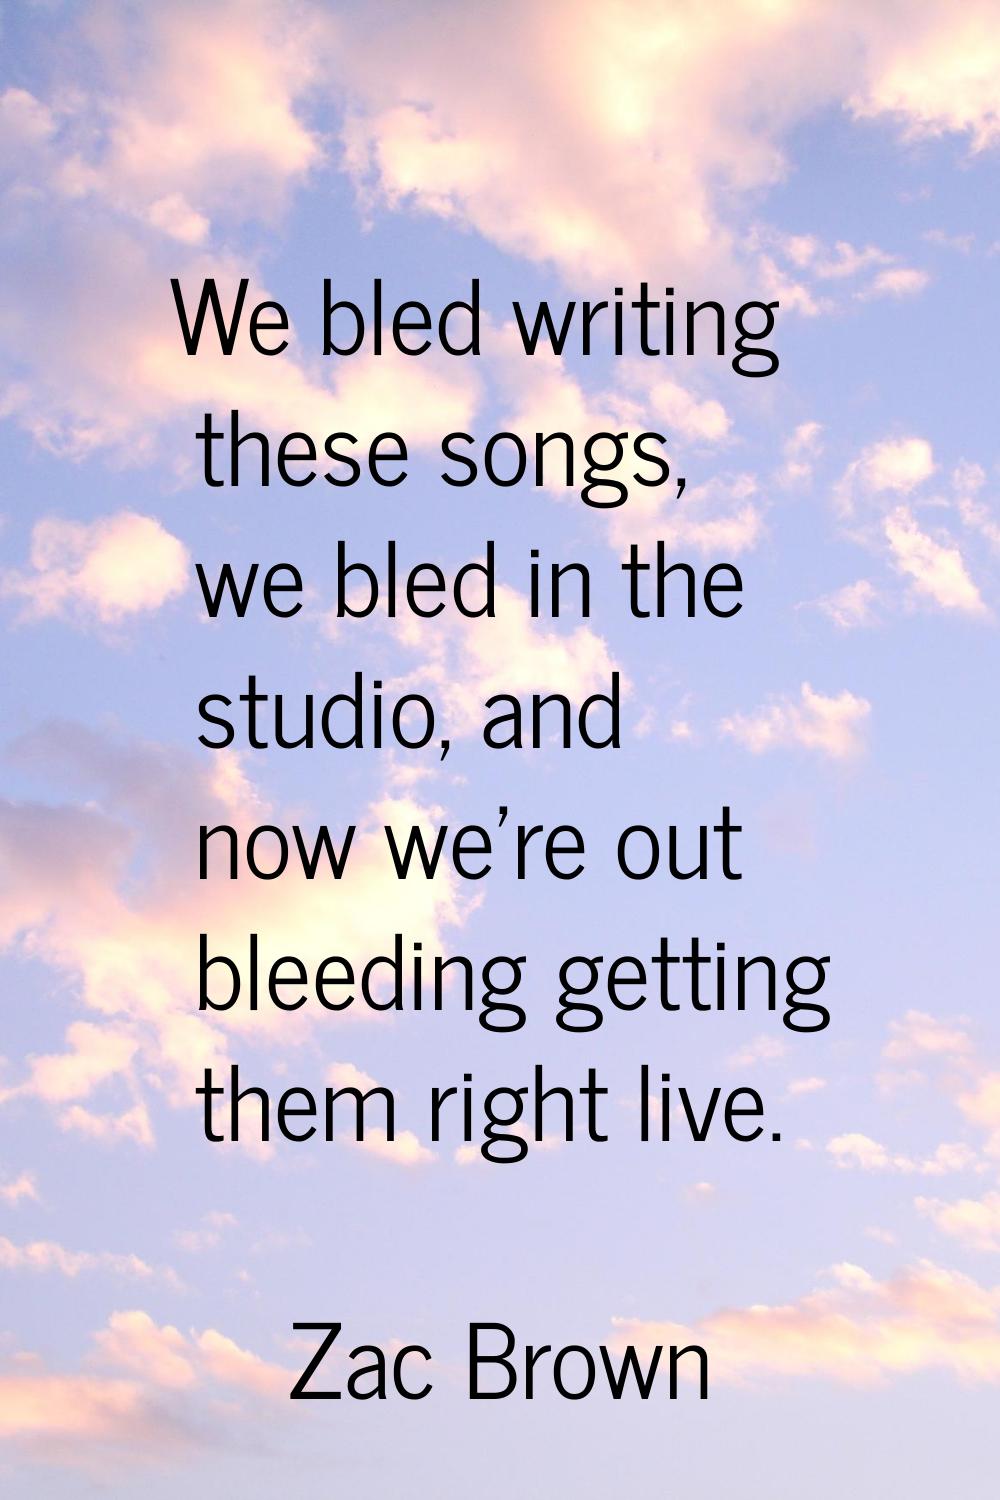 We bled writing these songs, we bled in the studio, and now we're out bleeding getting them right l